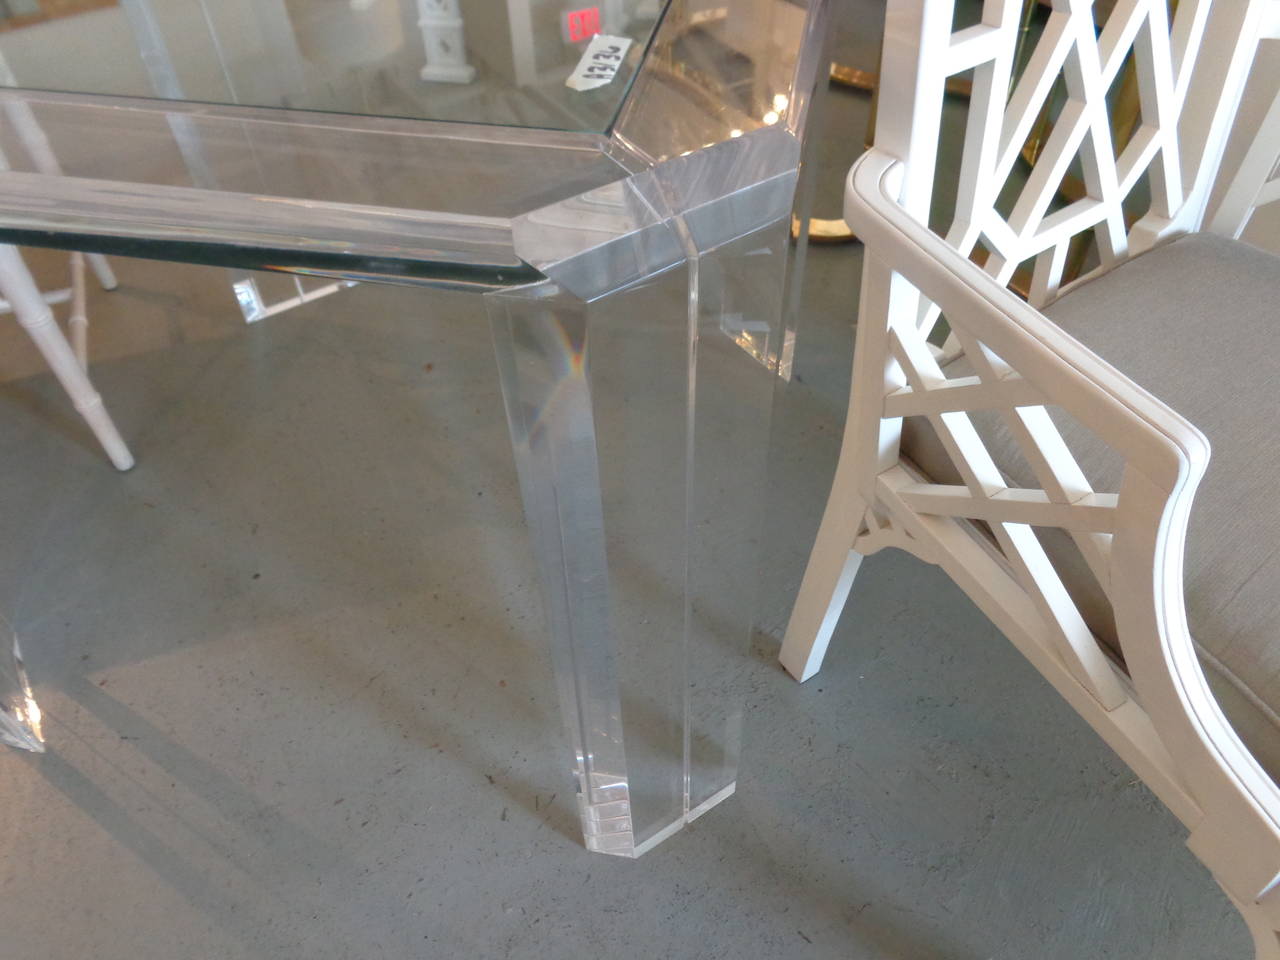 Lucite Les Prismatiques Game Table in nice as found vintage condition.